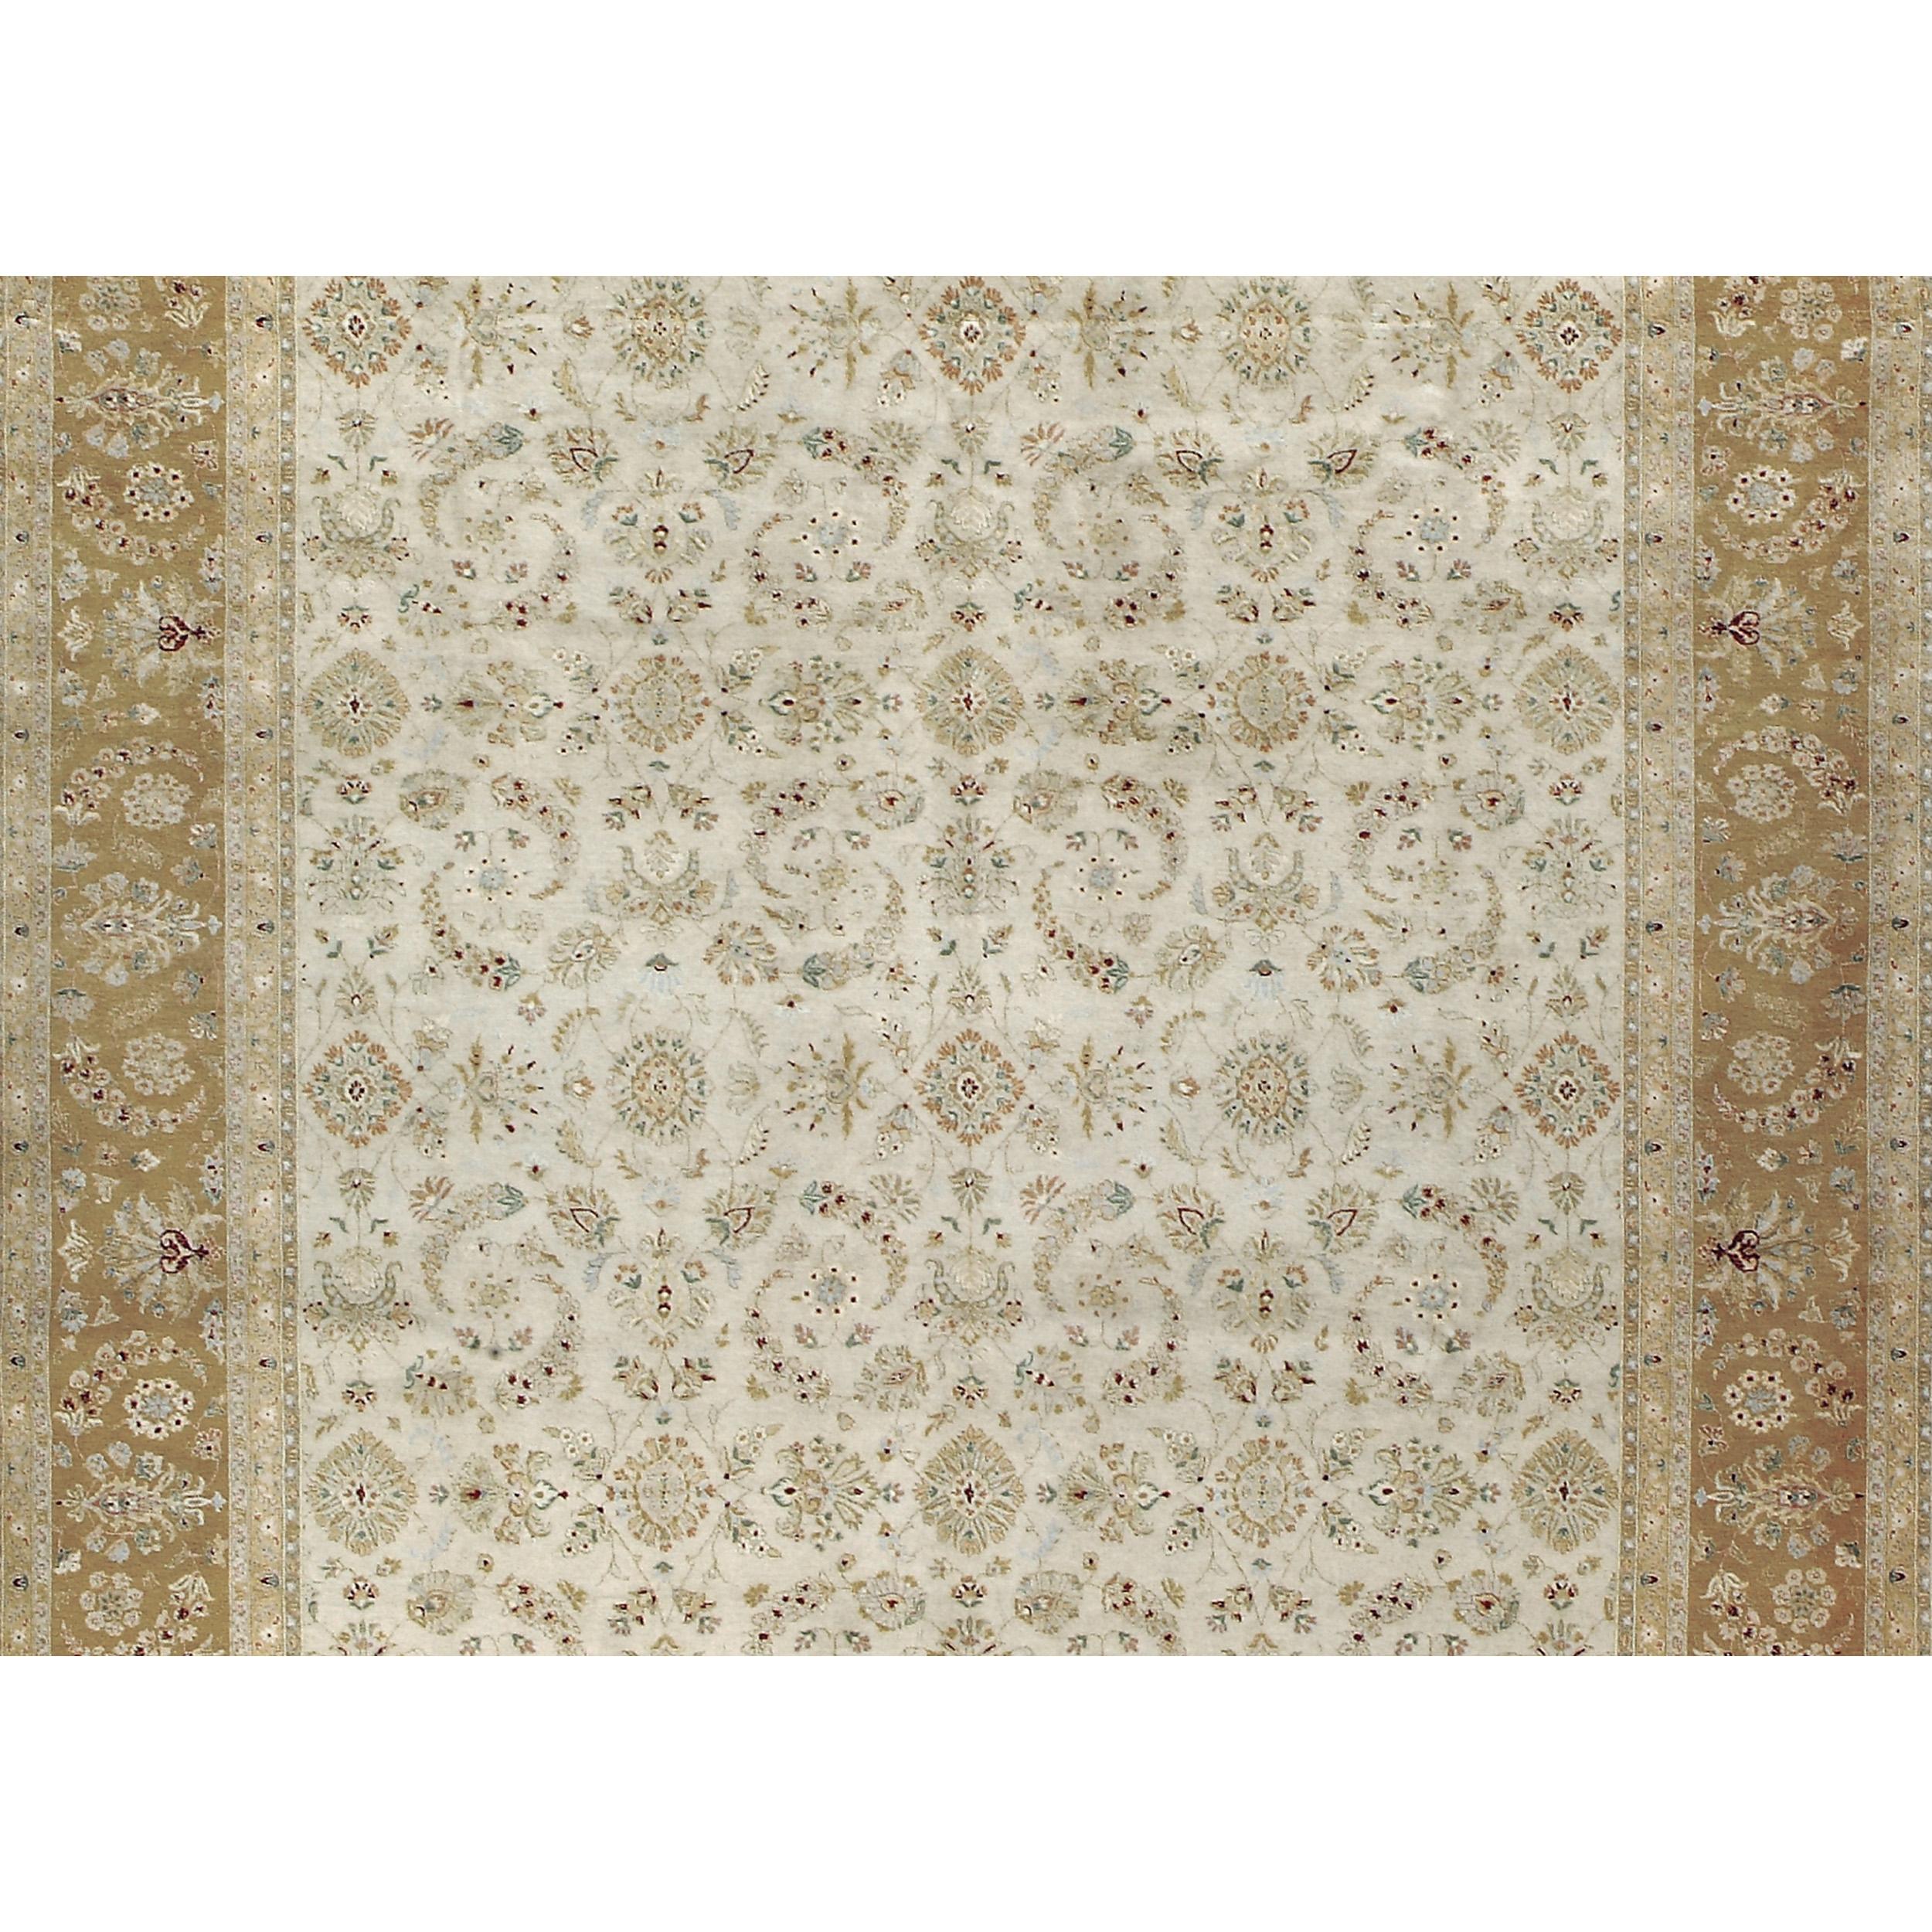 Luxury Traditional Hand-Knotted Yezd Cream and Gold 12x18 Rug In New Condition For Sale In Secaucus, NJ